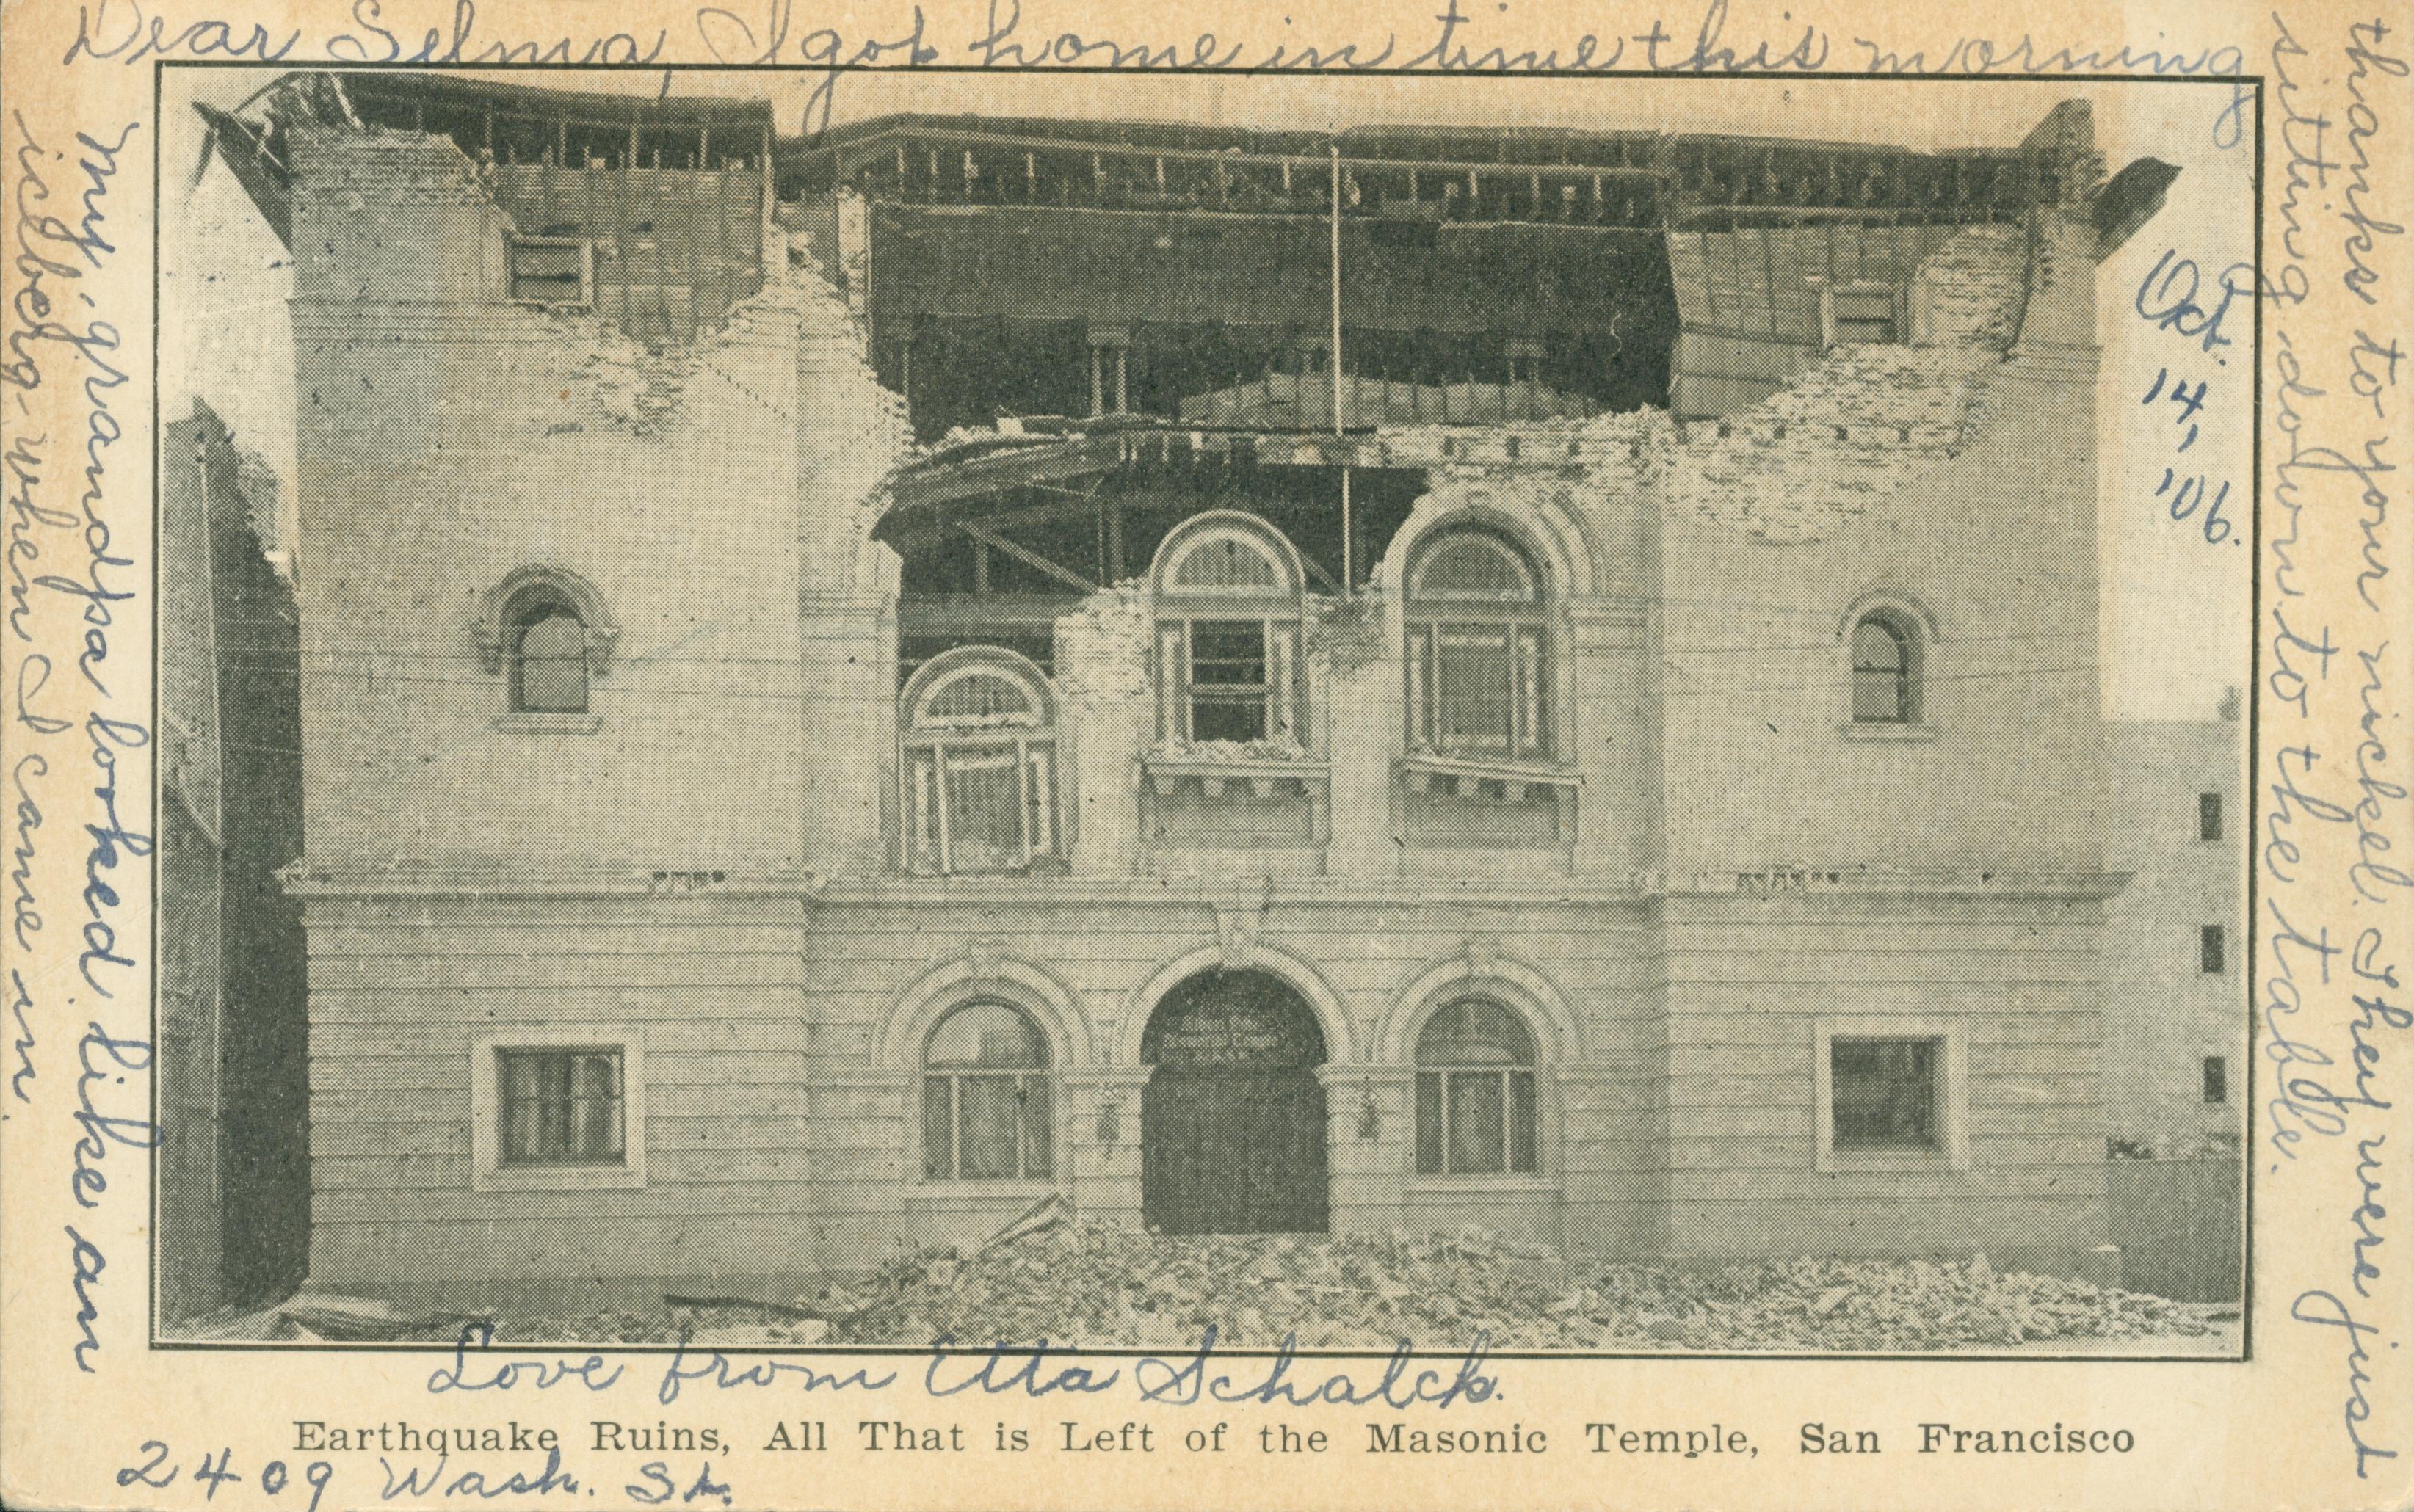 Shows the damage to the Masonic Temple in San Francisco.